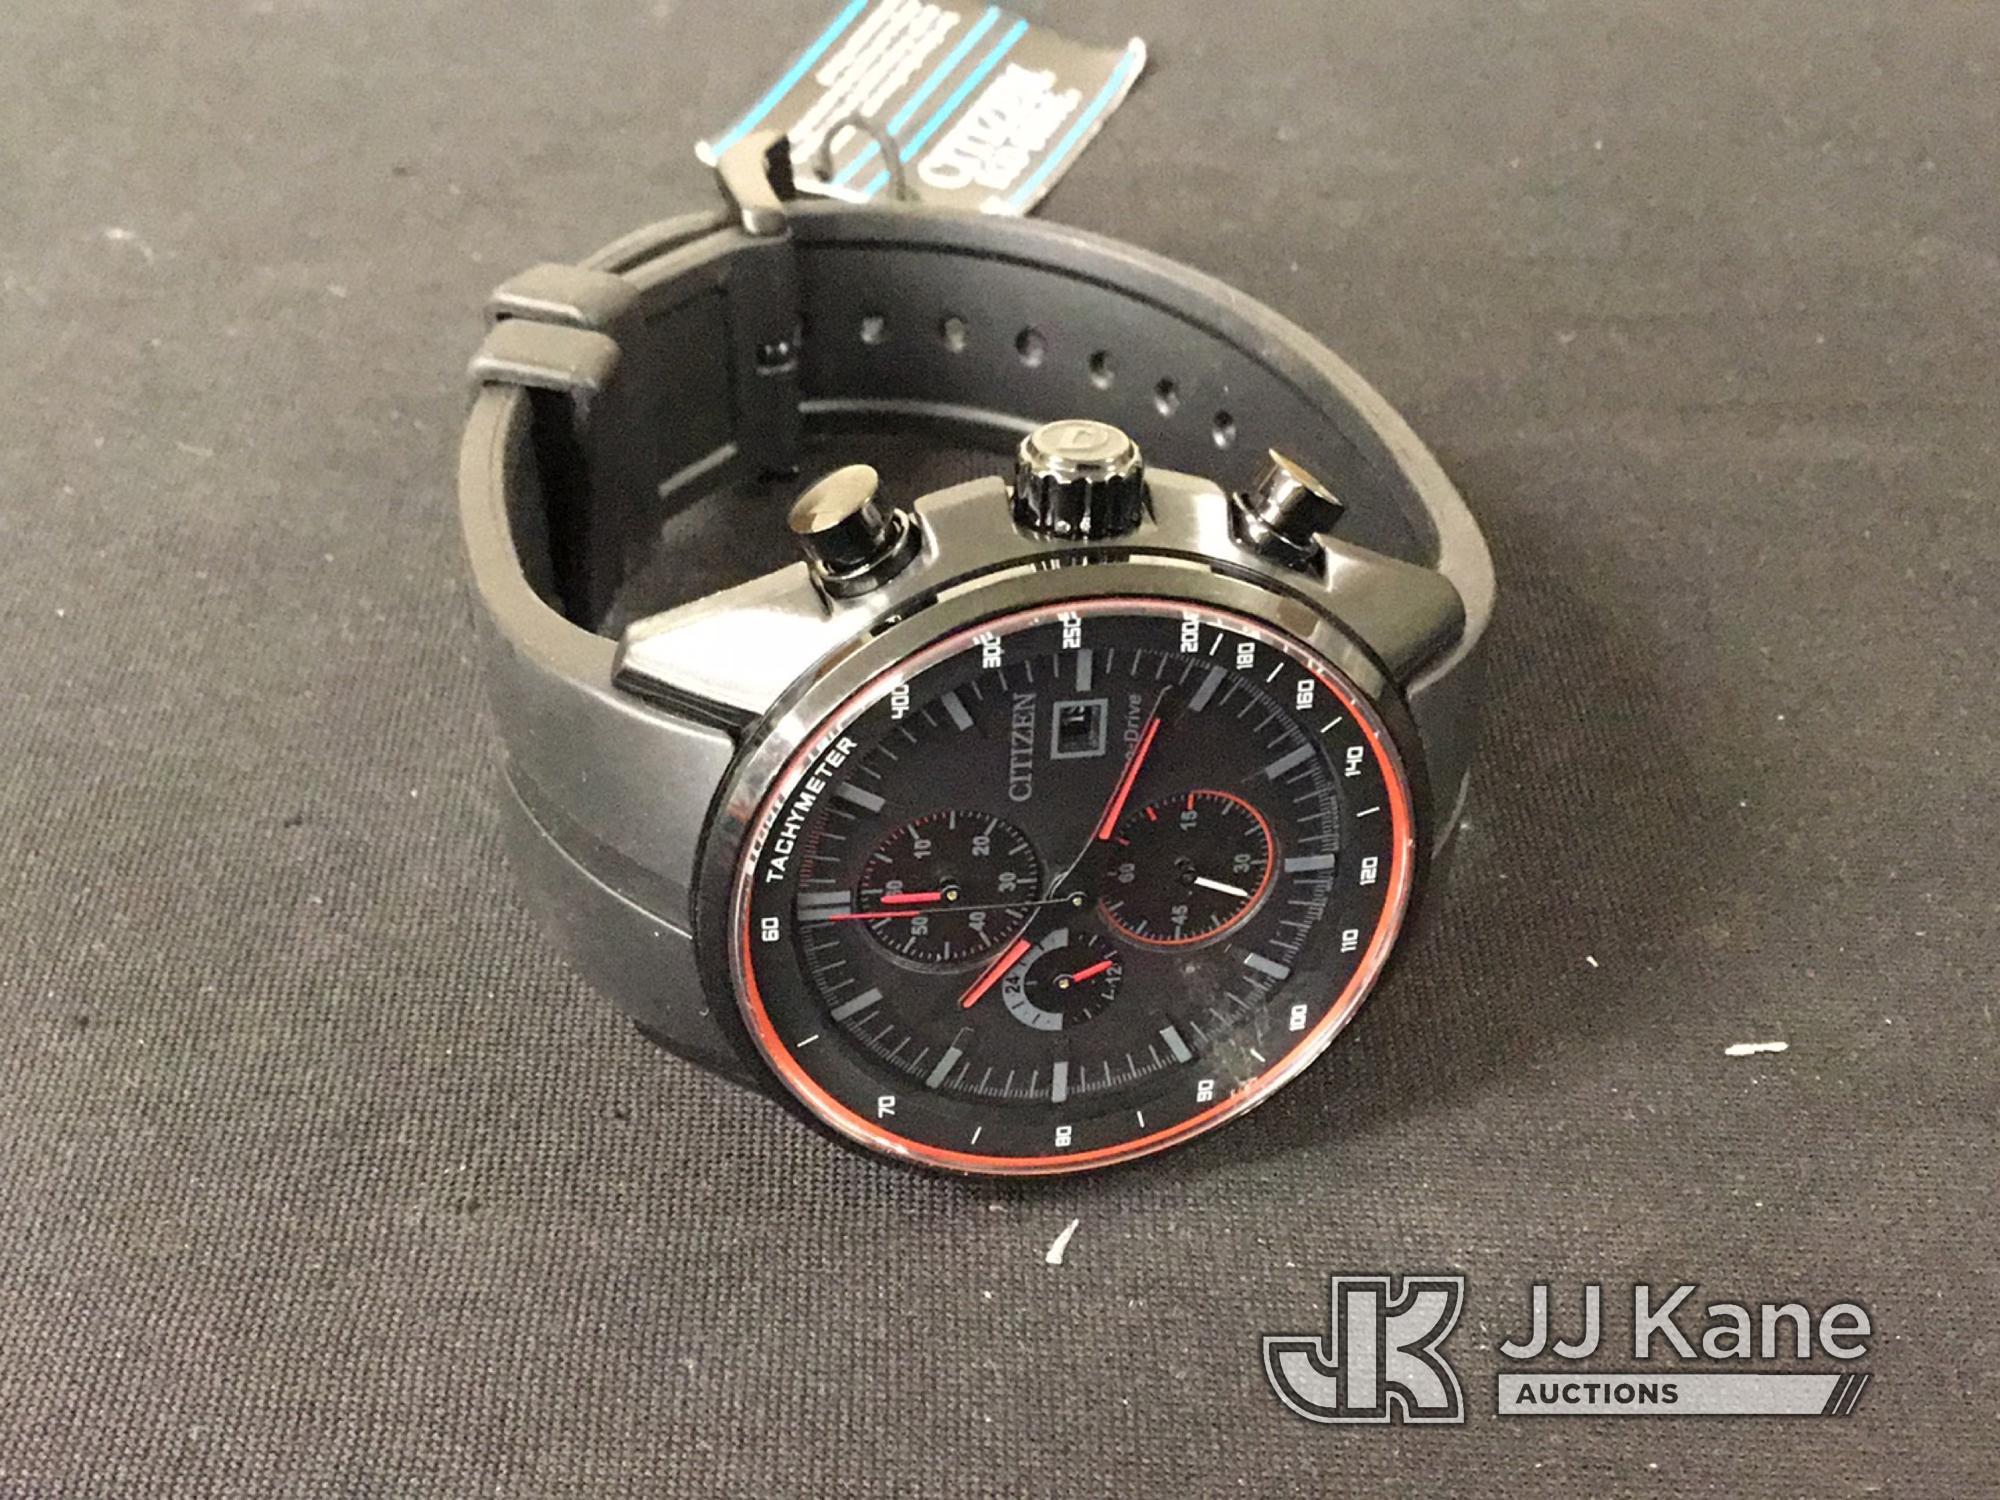 (Jurupa Valley, CA) Watches | authenticity unknown (New ) NOTE: This unit is being sold AS IS/WHERE